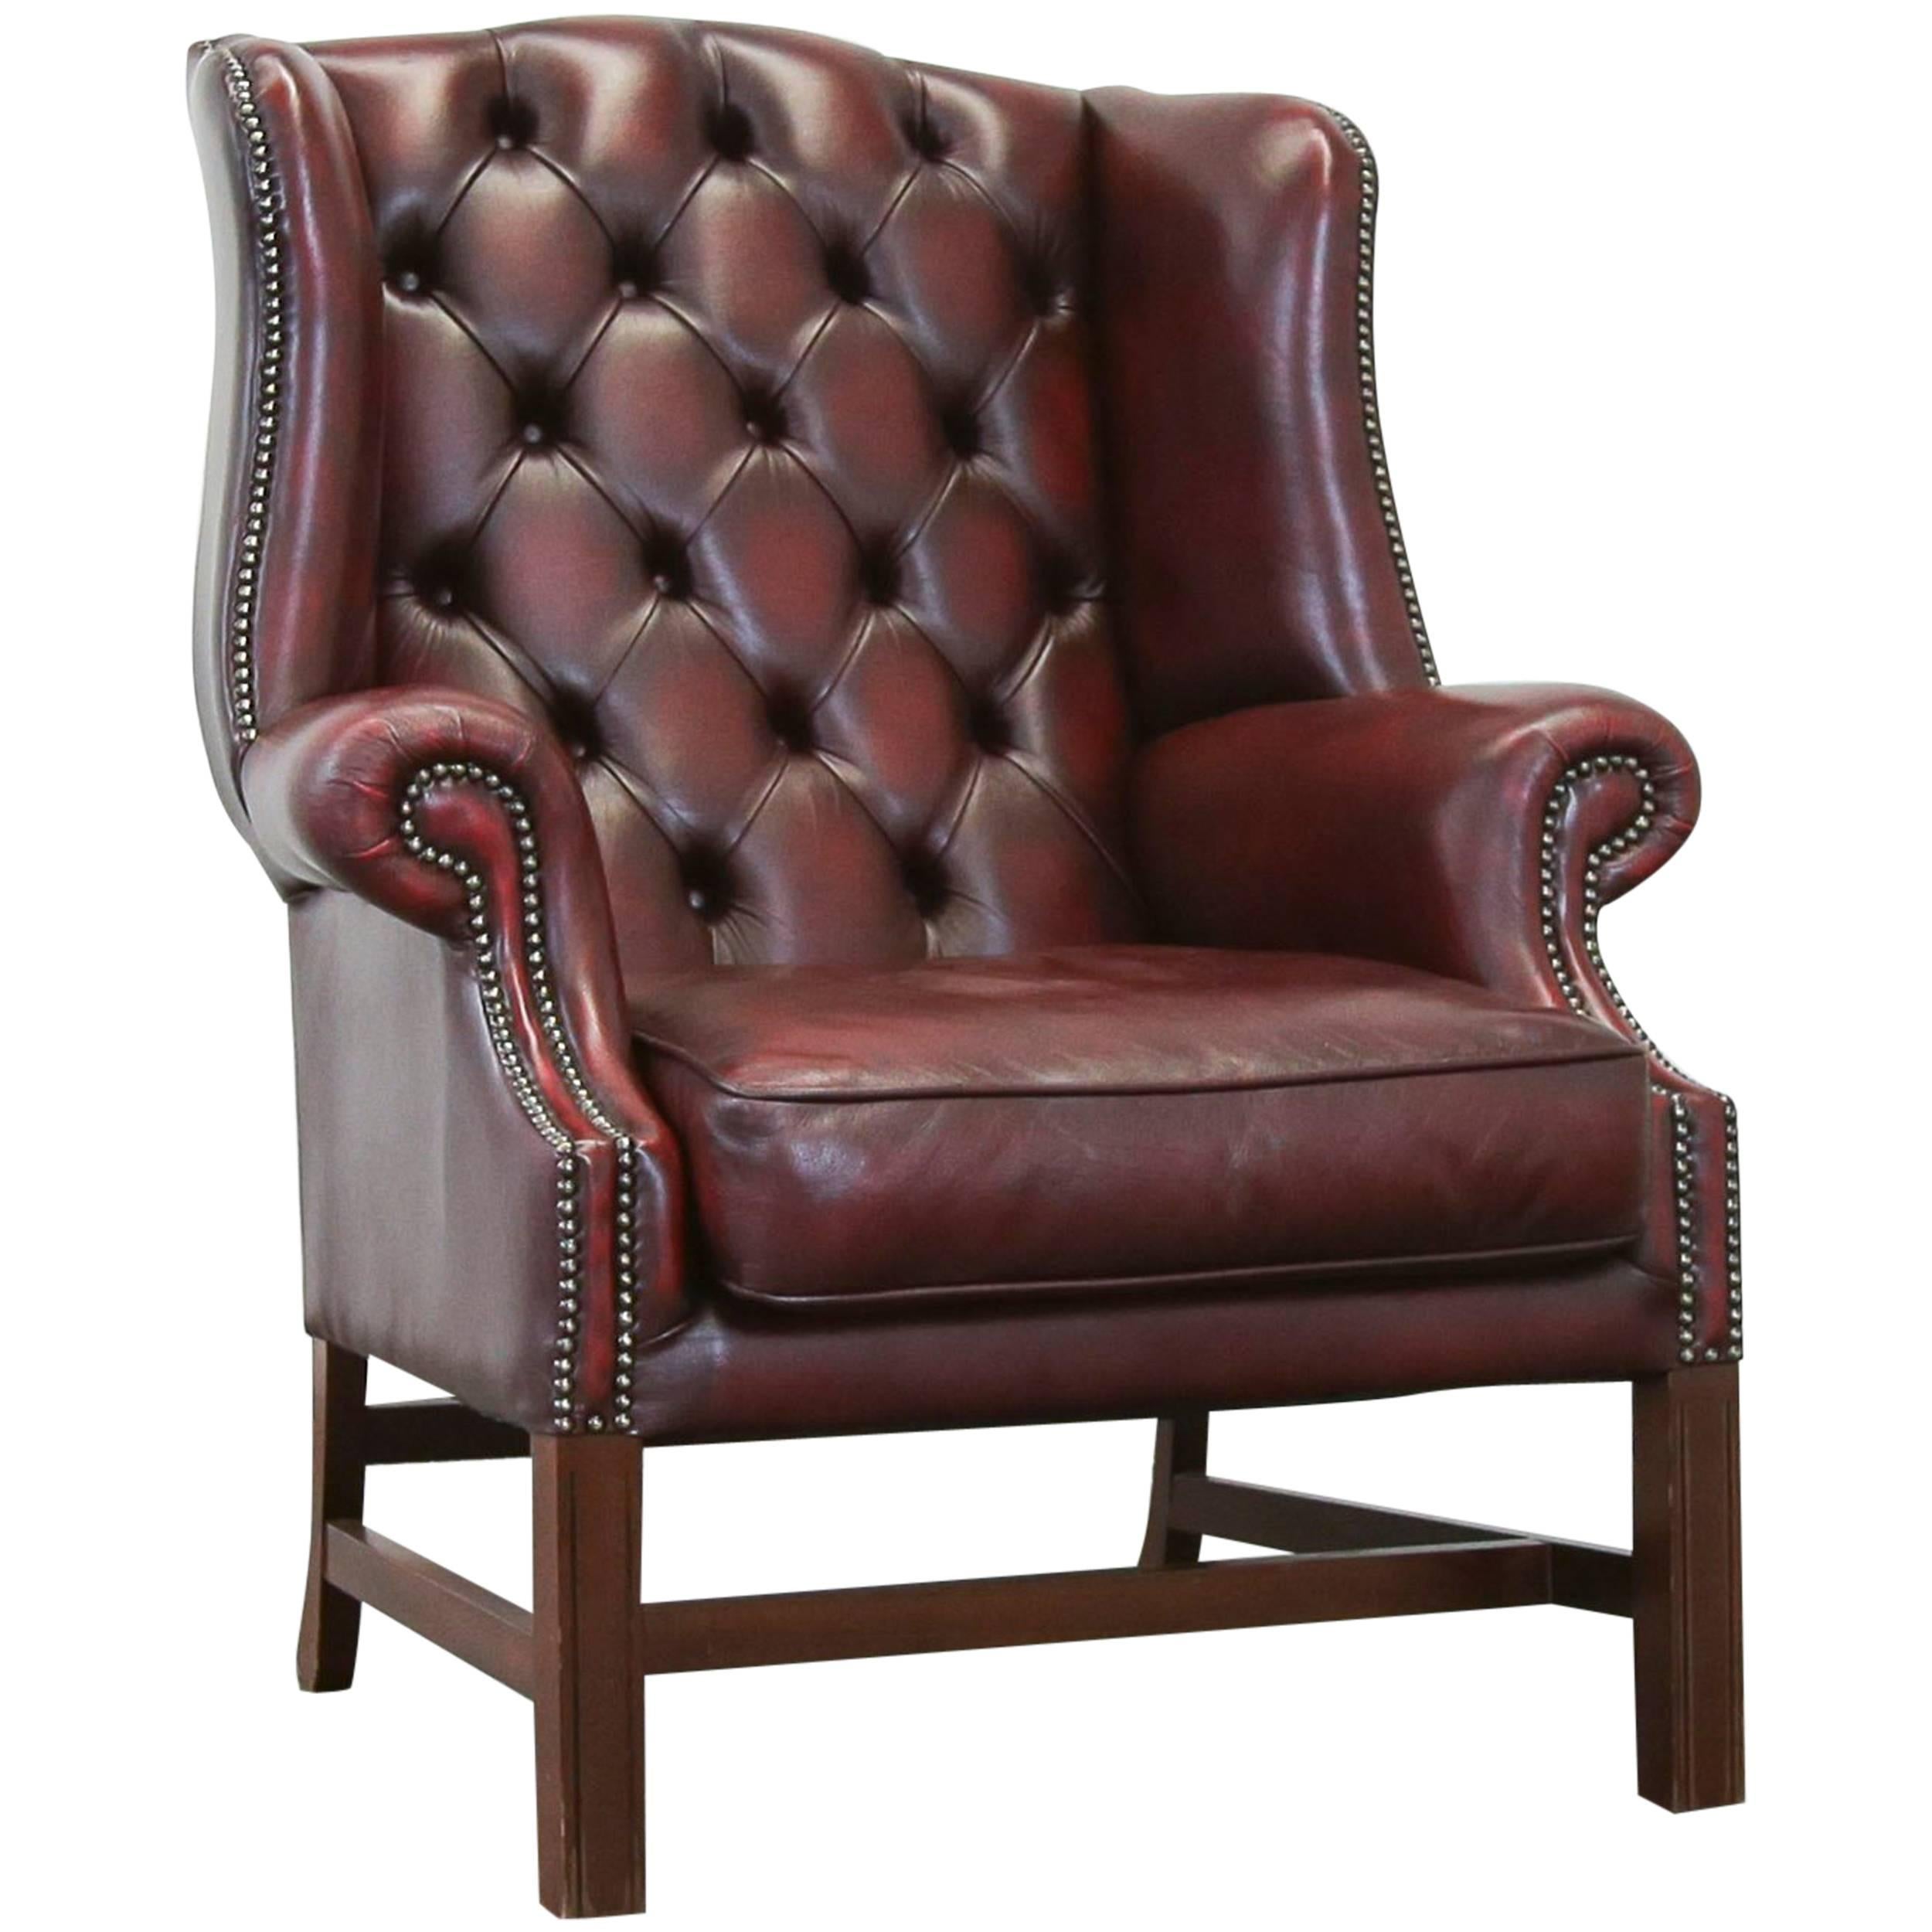 Chesterfield Wingchair Oxblood Red Armchair One Seat Vintage Retro